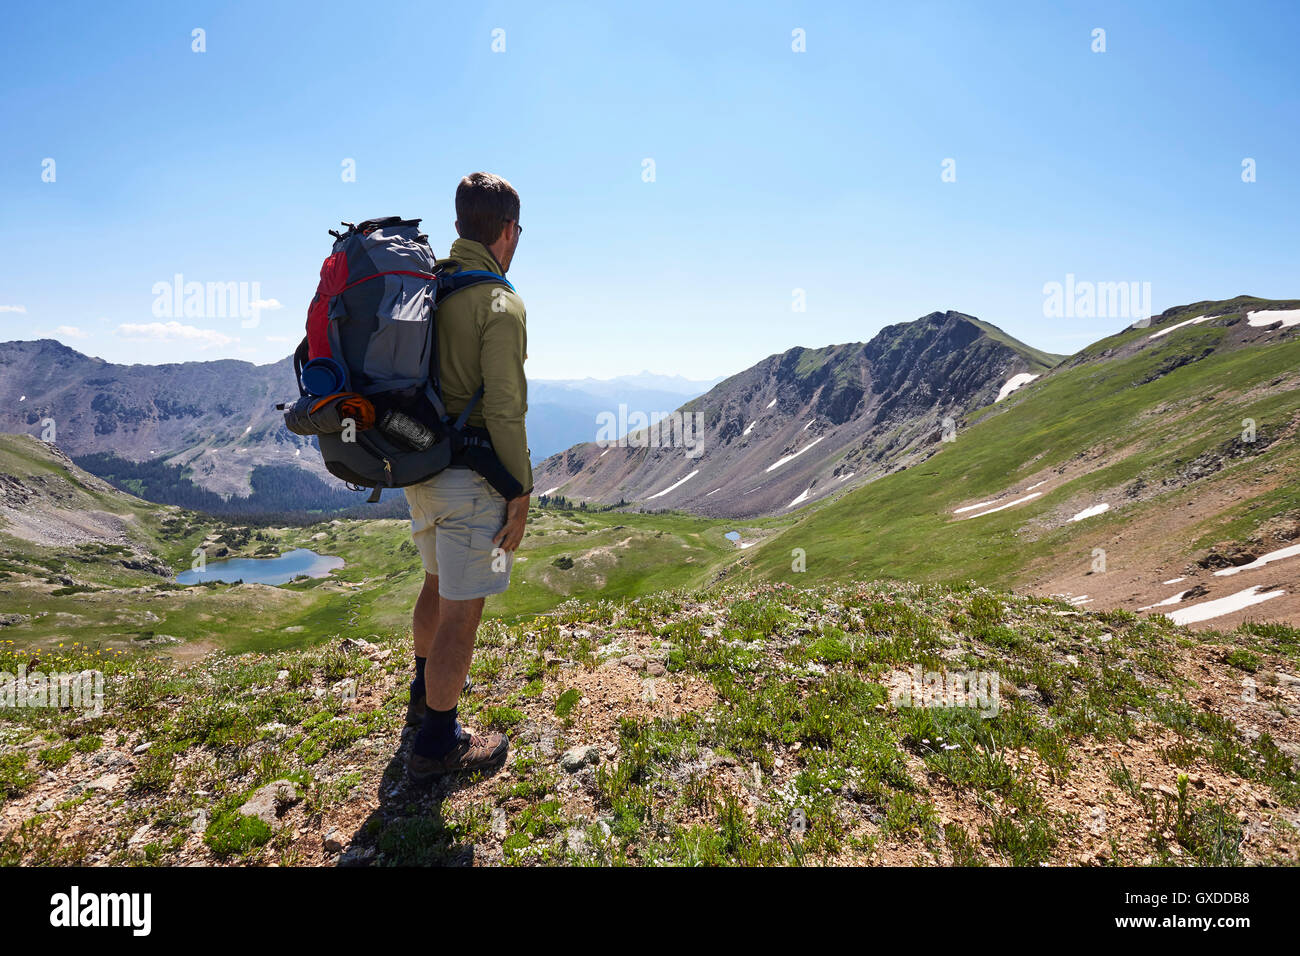 Male backpacker looking out at landscape, Never Summer Wilderness, Colorado, USA Stock Photo